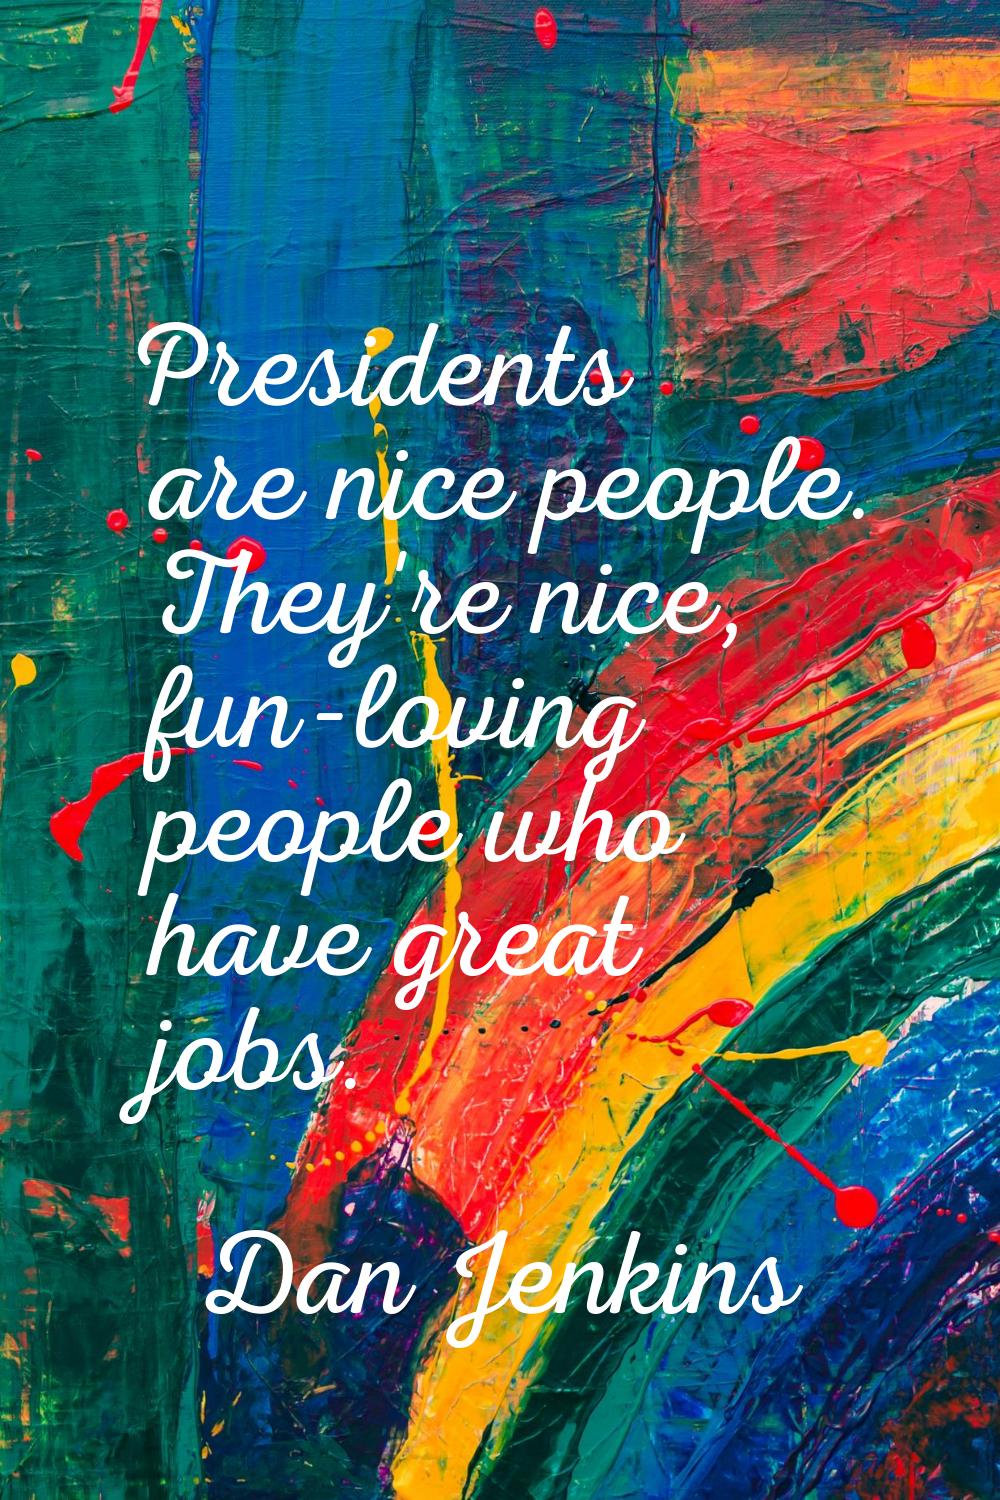 Presidents are nice people. They're nice, fun-loving people who have great jobs.